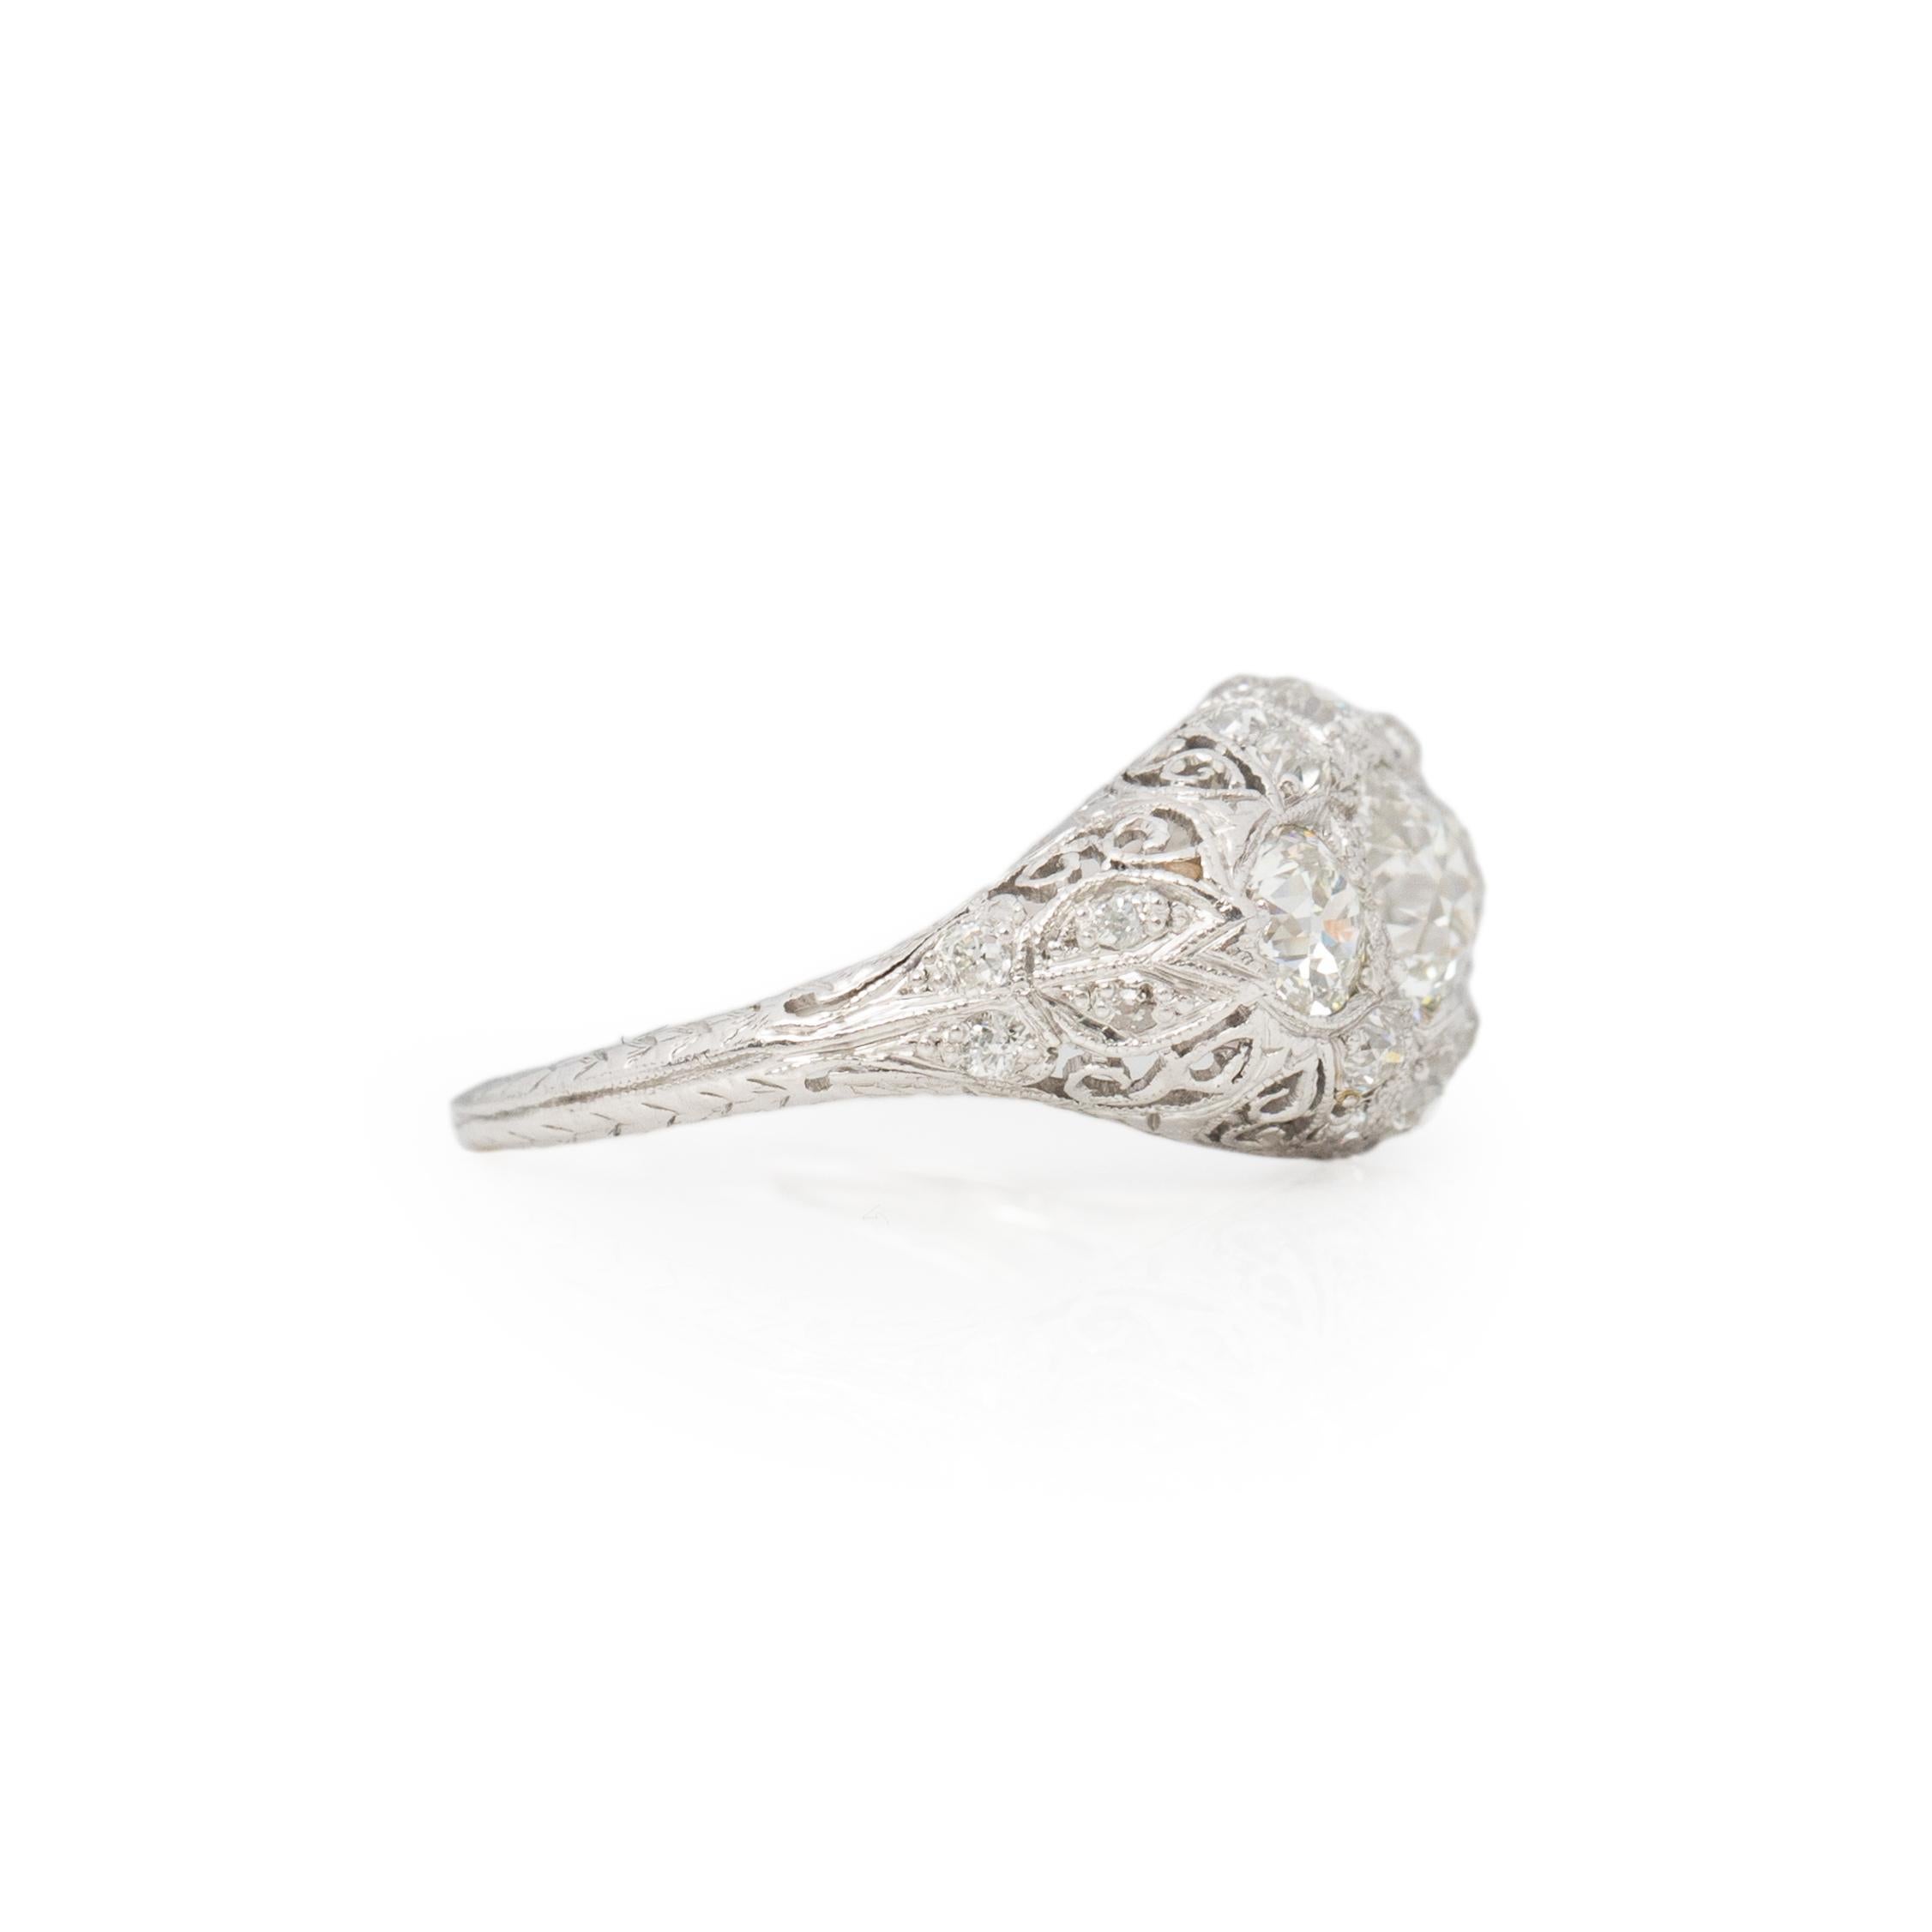 Here we have a stunning Art Deco piece, crafted in platinum. These three stone ring has outstanding filigree details, the delicate lace like design wraps around the diamonds giving the ring a weightless feel. In the center is a near one carat old